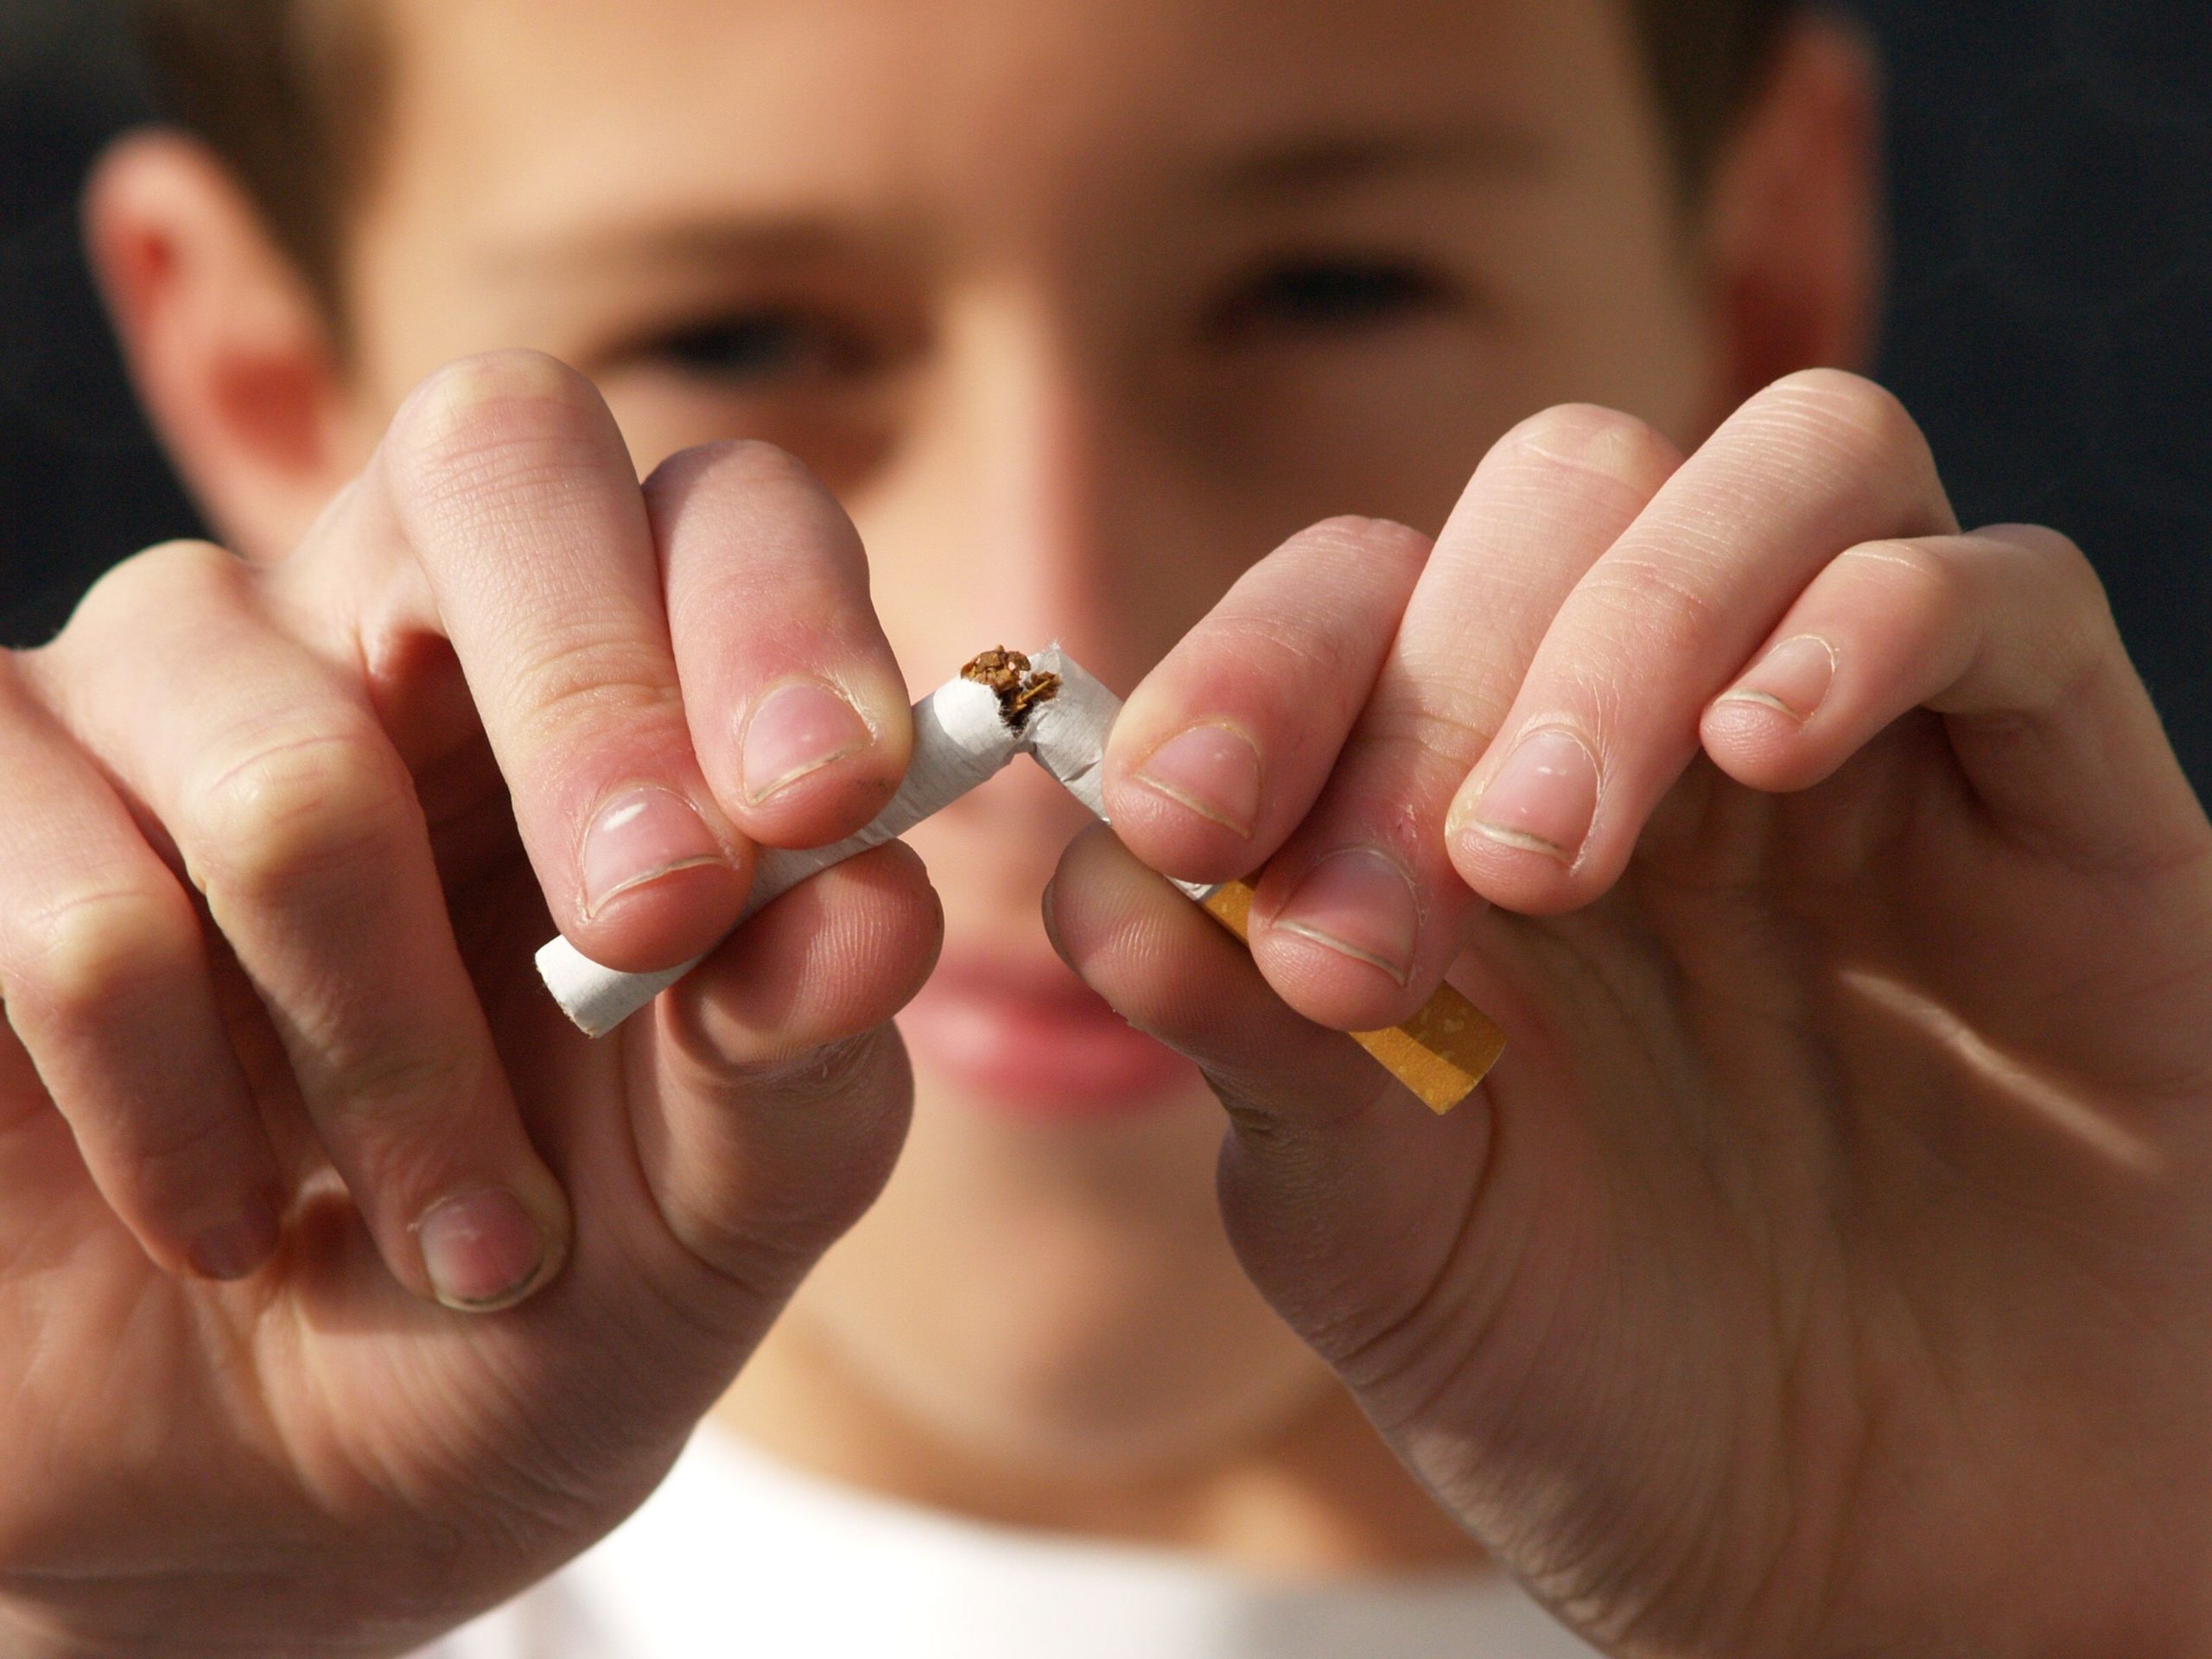 Creighton Dentist | Tobacco & Your Teeth: The Risks of Chewing and Smoking